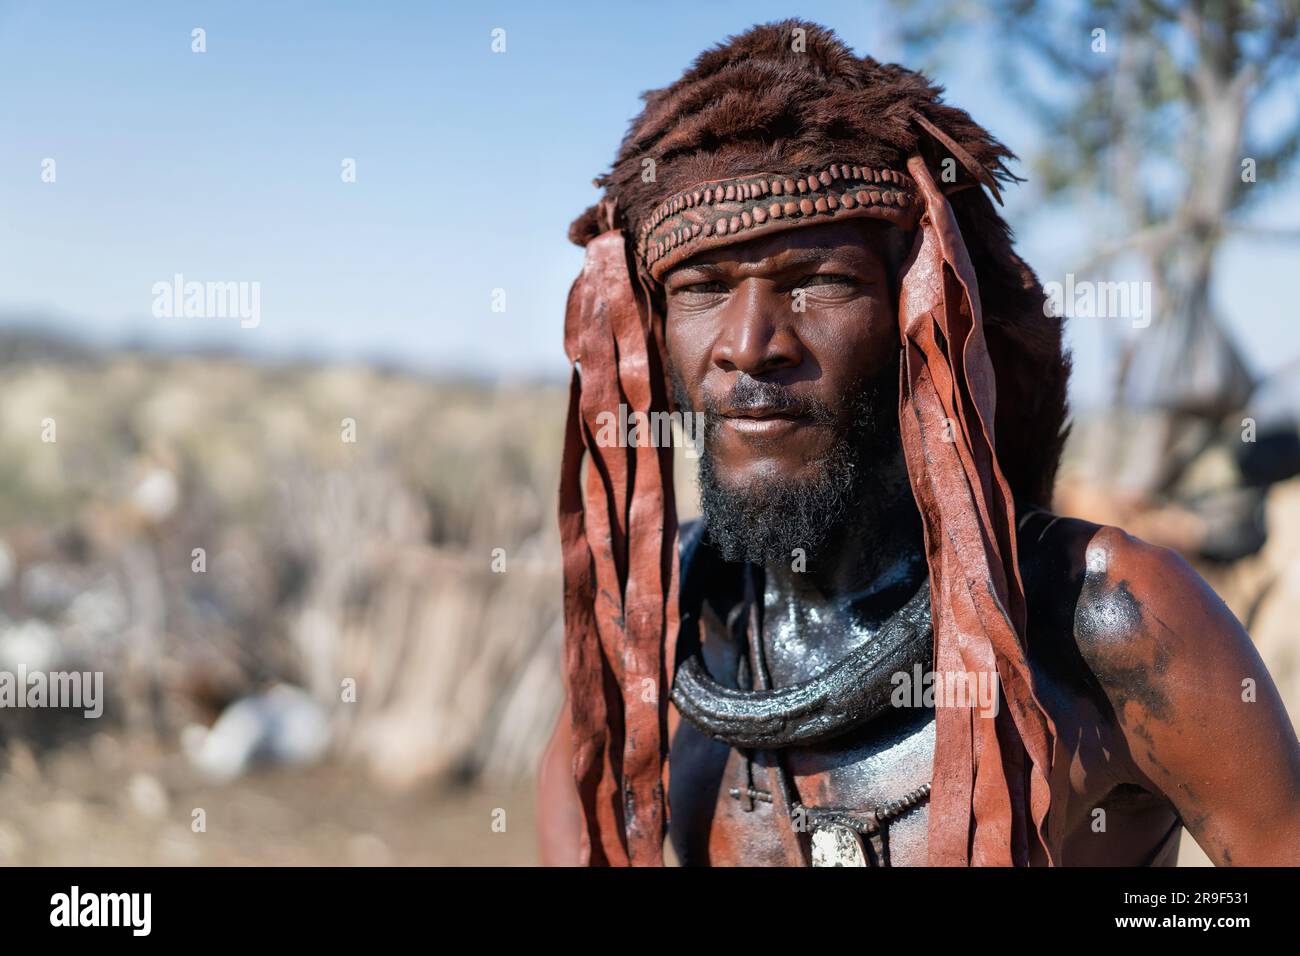 Himba man dressed in traditional style at his village near Kamanjab in Namibia, Africa. Stock Photo